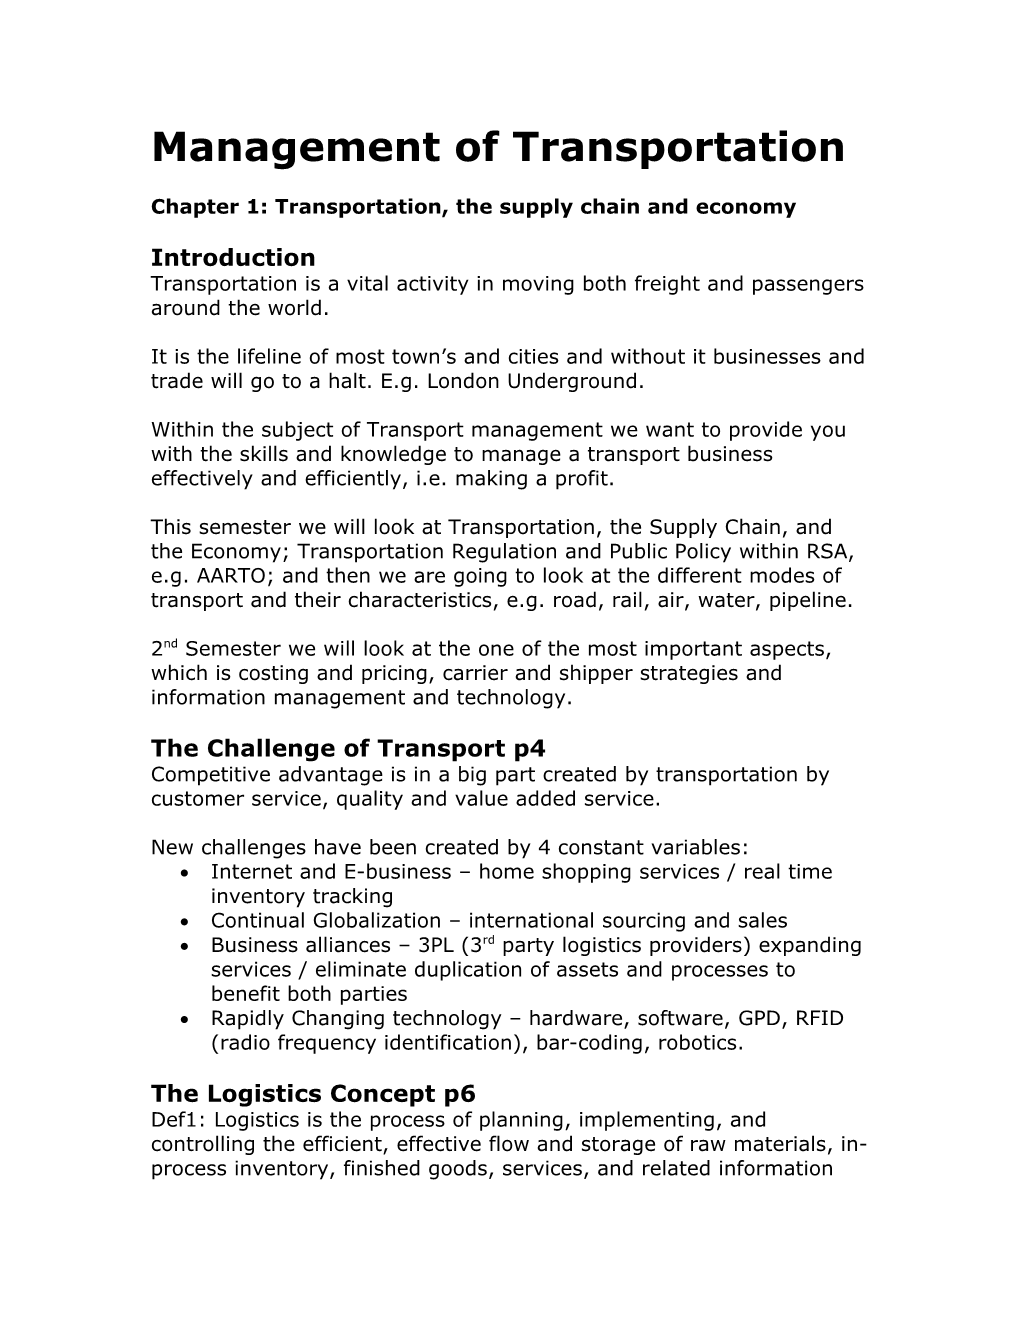 Chapter1: Transportation, the Supply Chain and Economy